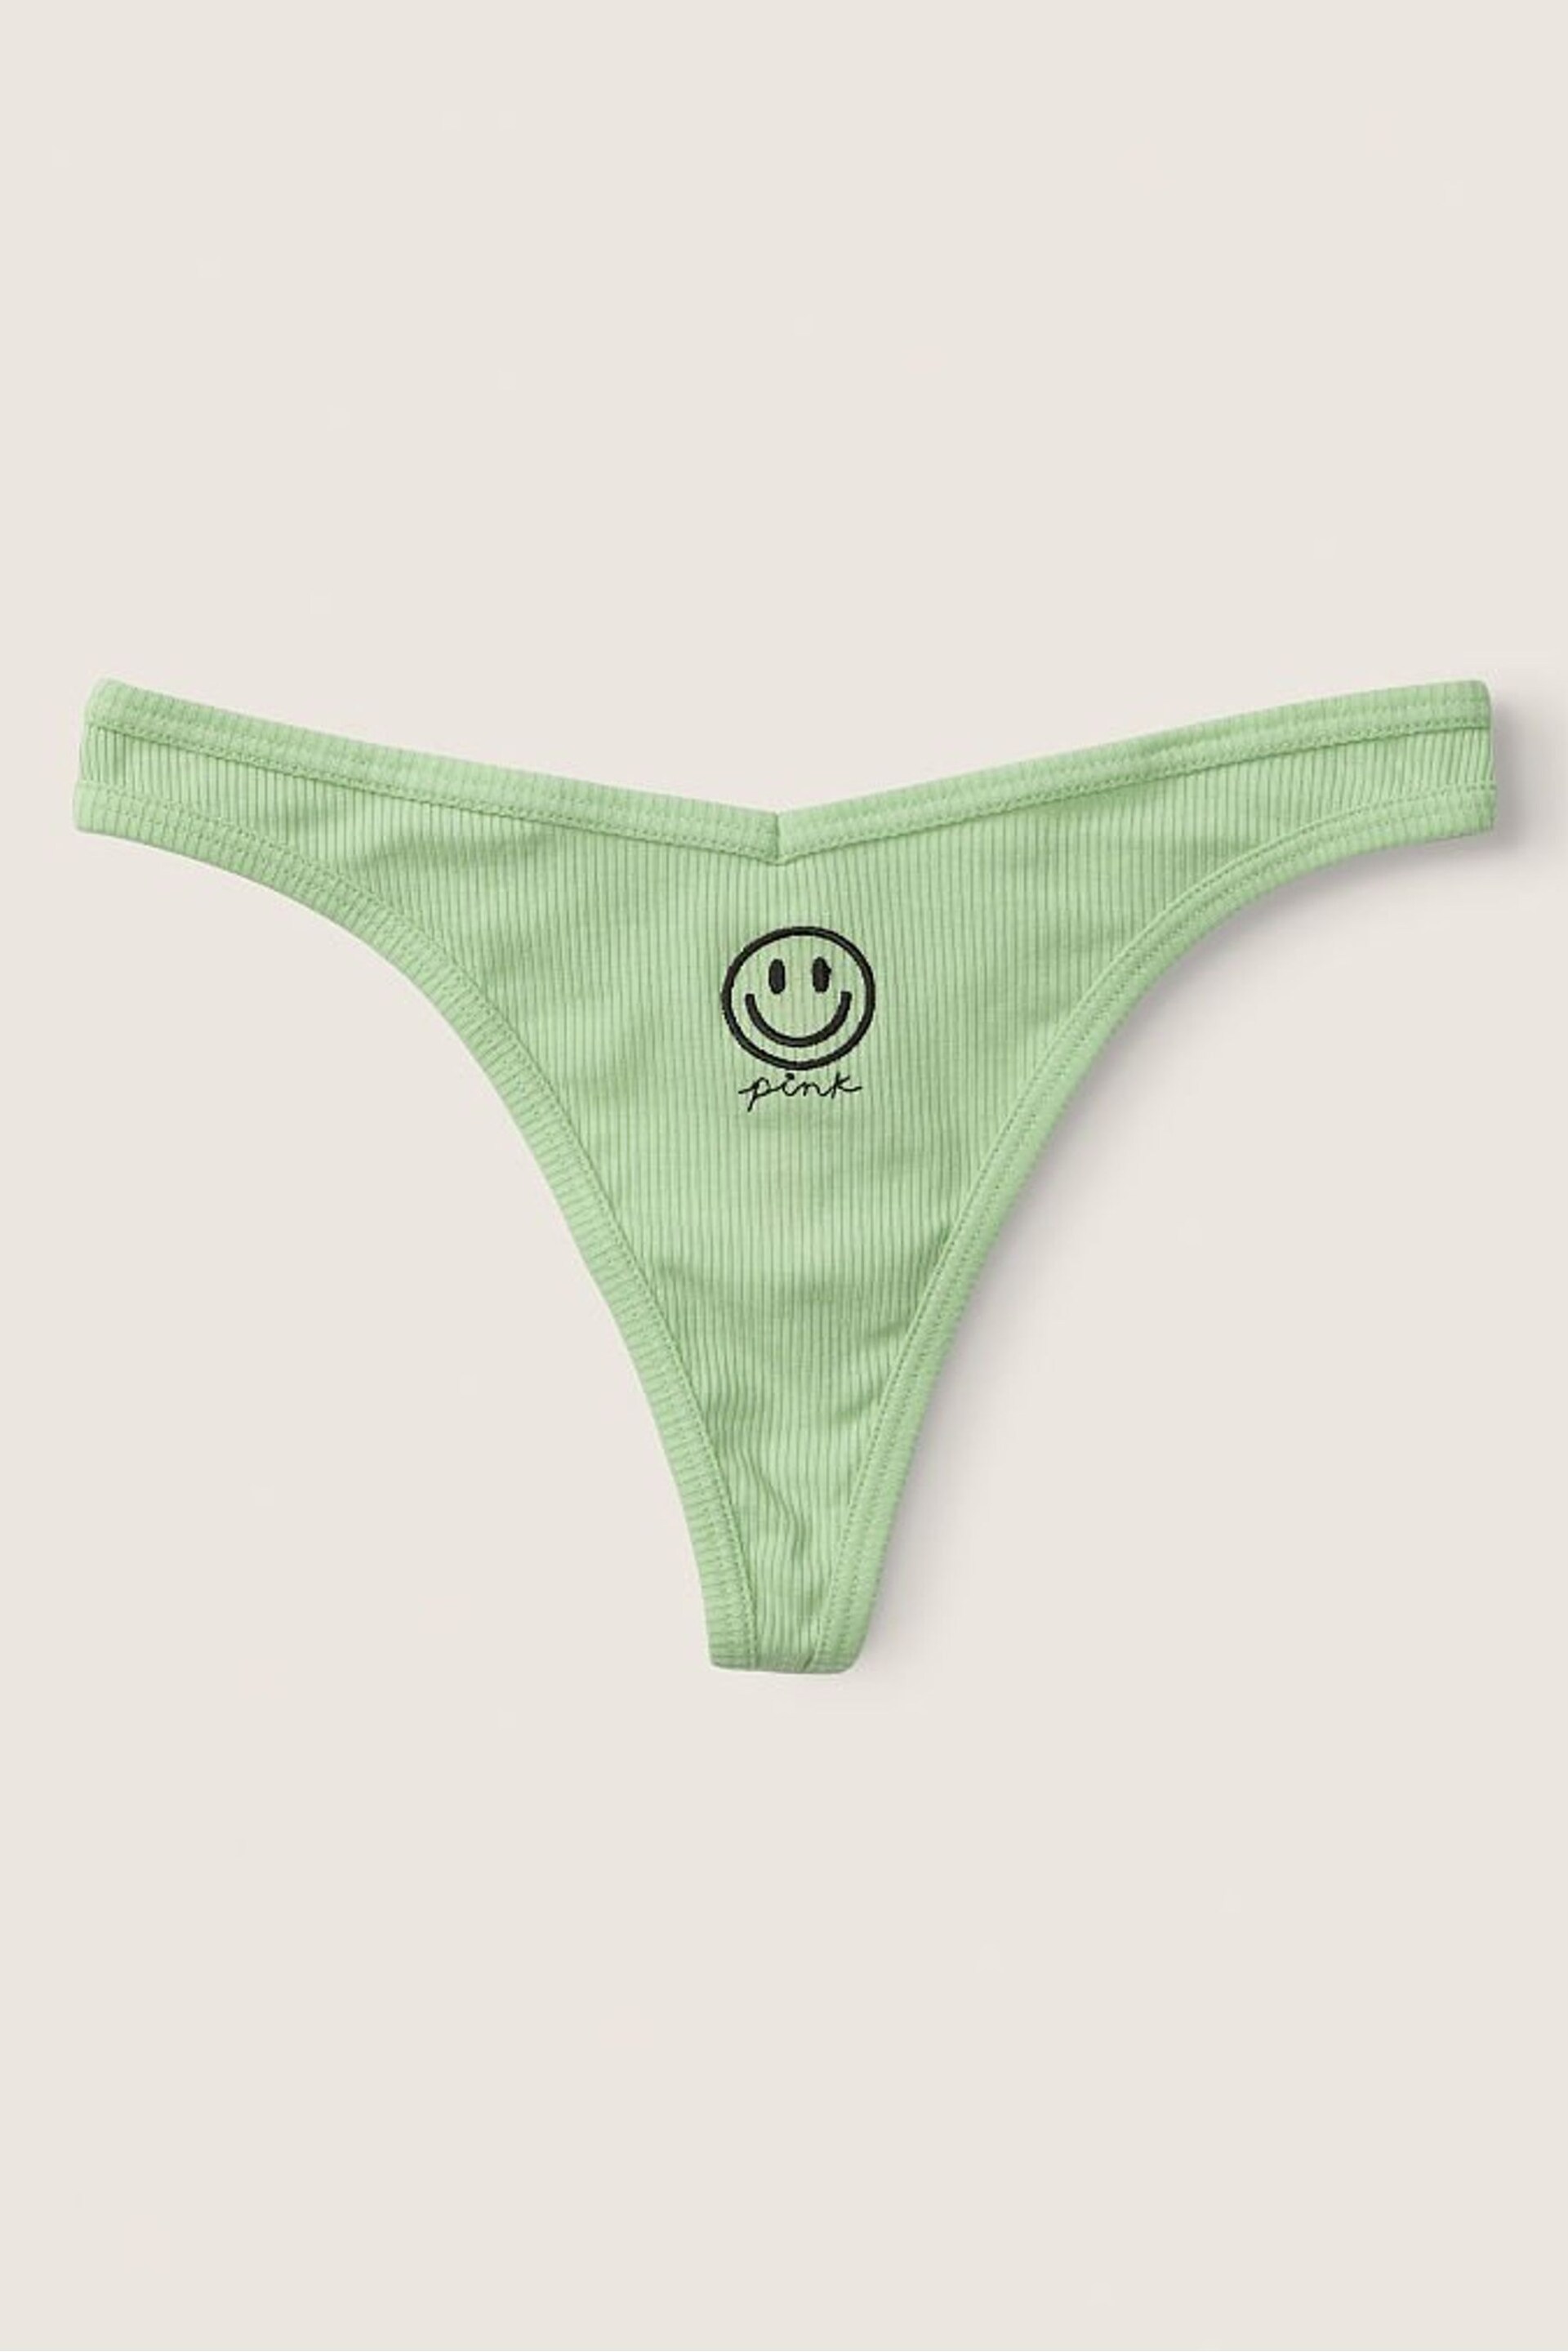 Victoria's Secret PINK Soft Jade with Embroidery Green Cotton Thong Knickers - Image 2 of 2